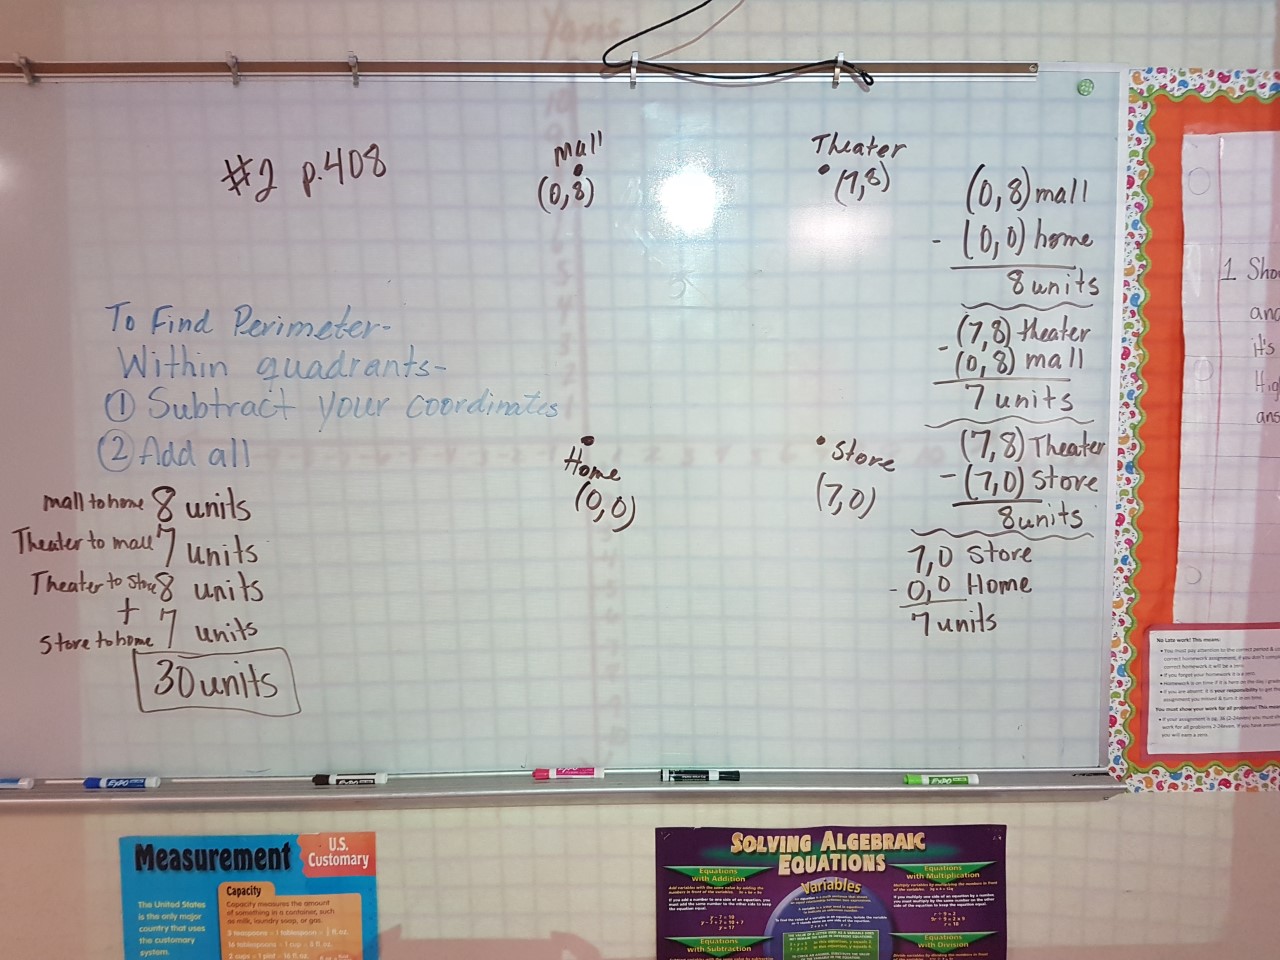 mrs-negron-6th-grade-math-class-lesson-14-2-polygons-in-the